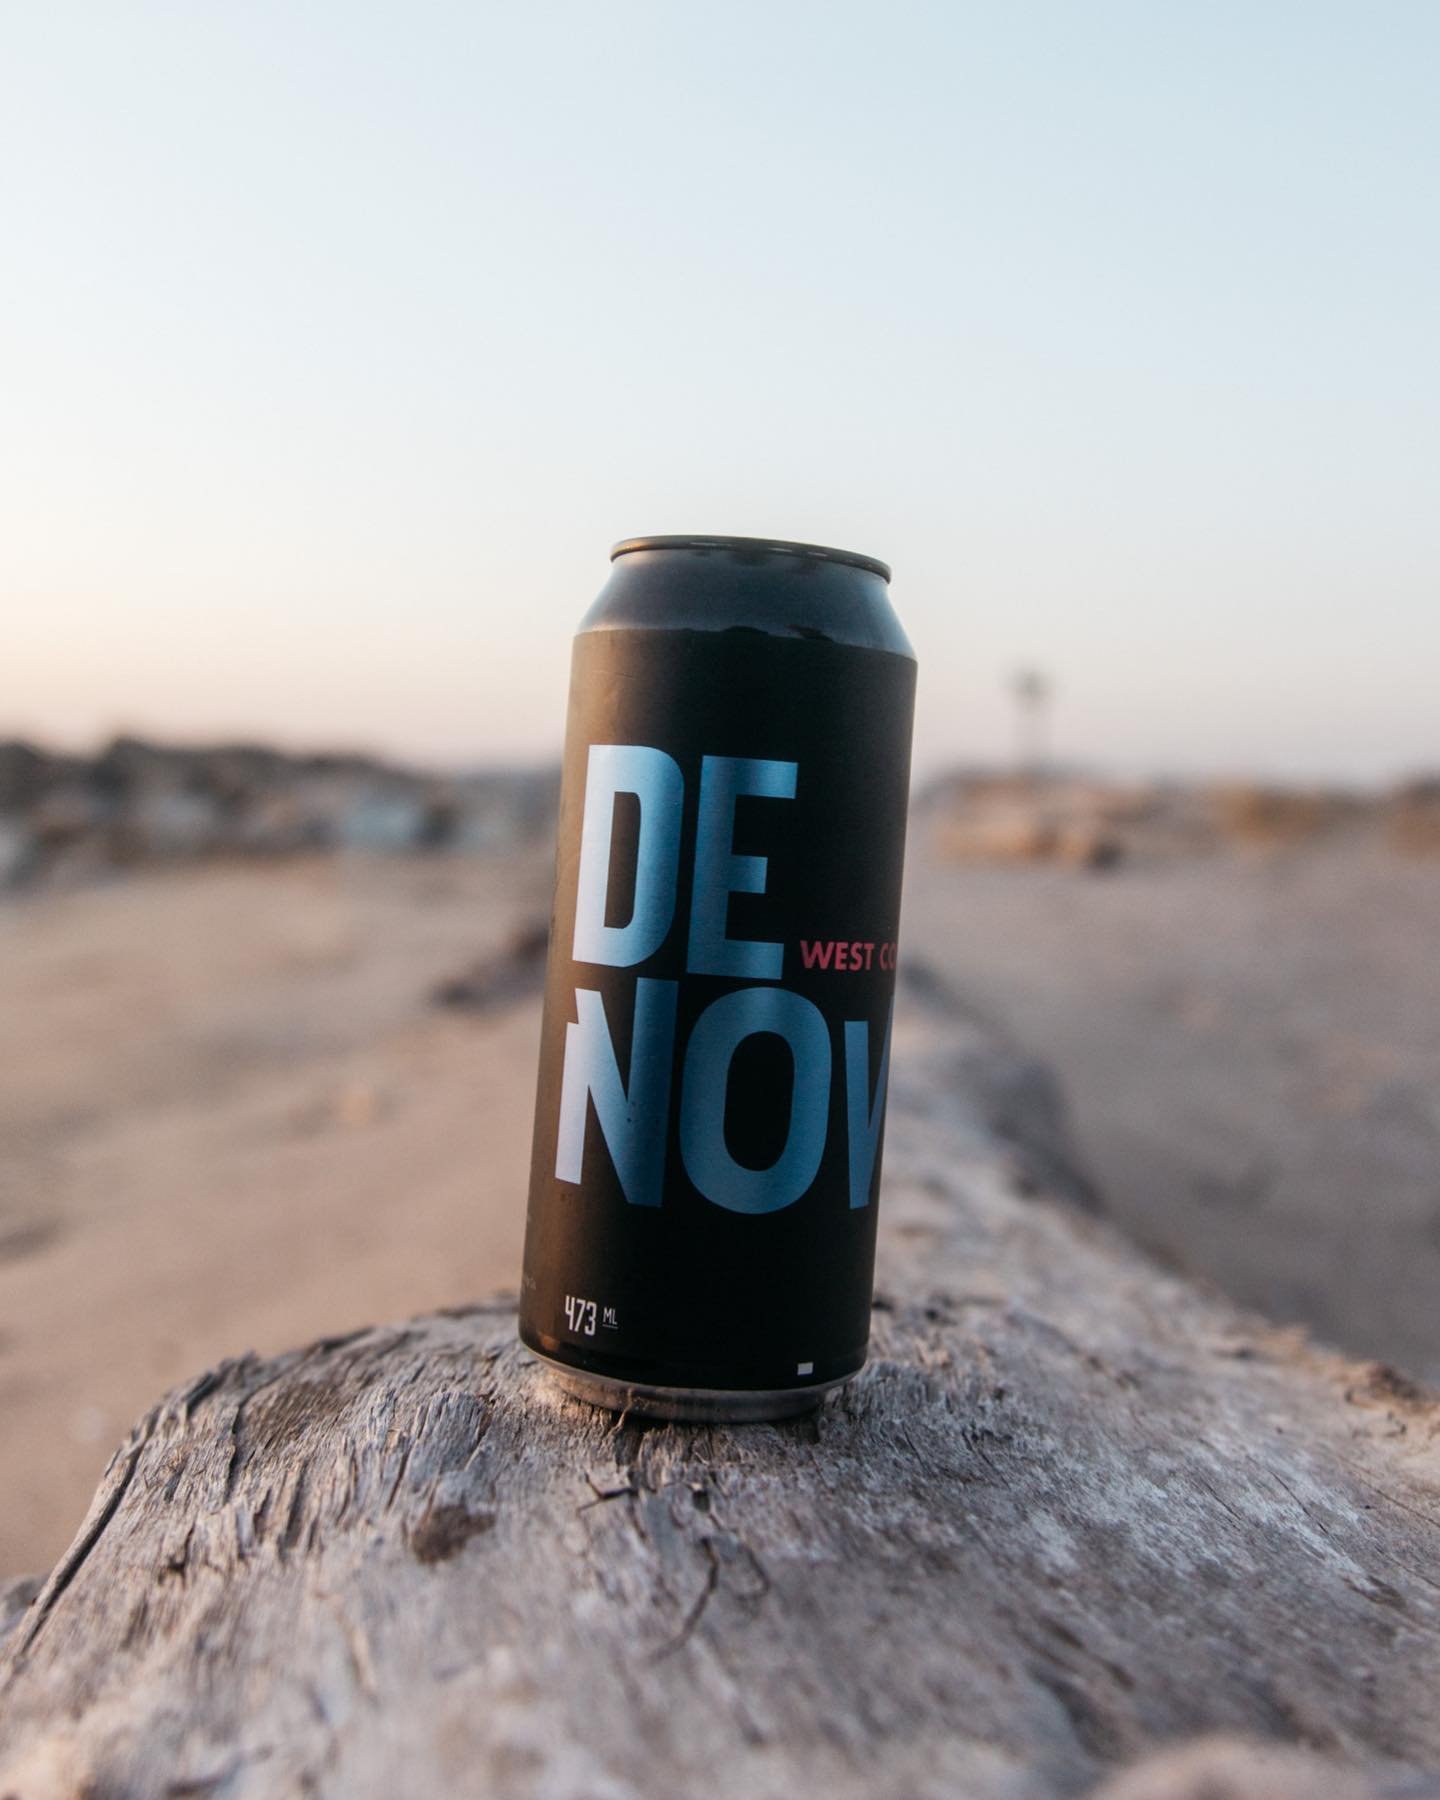 DeNovo West Coast IPA may be off tap but we still have a VERY limited number of 4-packs left at the pub. Get &lsquo;em while the getting&rsquo;s good! 

De Novo is a 6.2% and 50 IBU, this beer was inspired by the brew team&rsquo;s recent travels to t